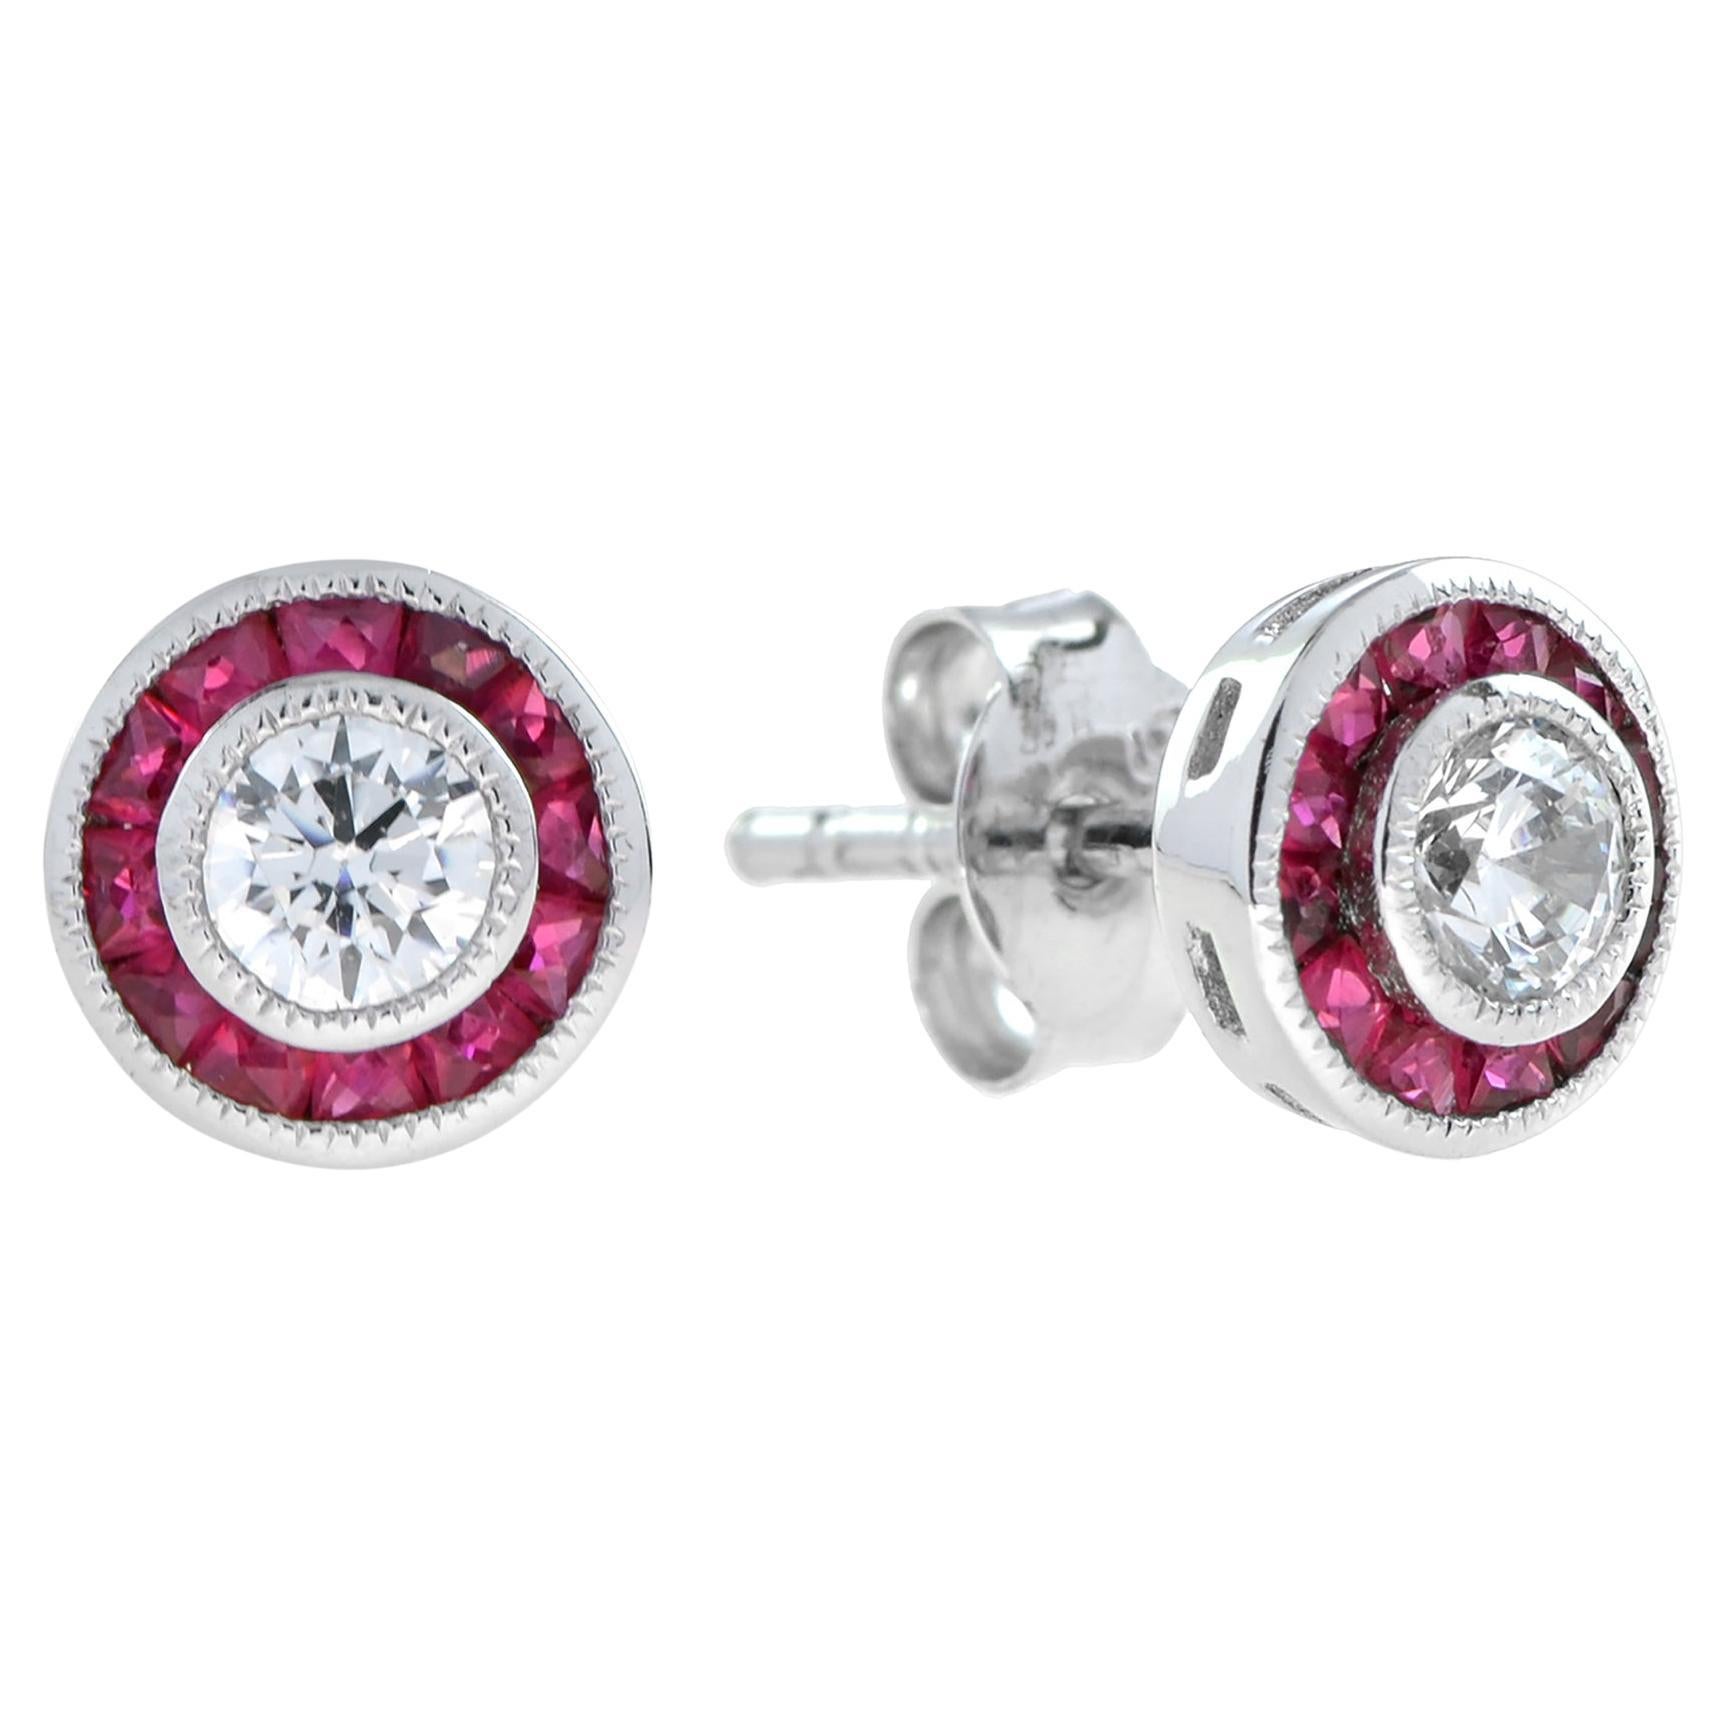 Art Deco Round Diamond with Ruby Stud Earrings in 18K White Gold